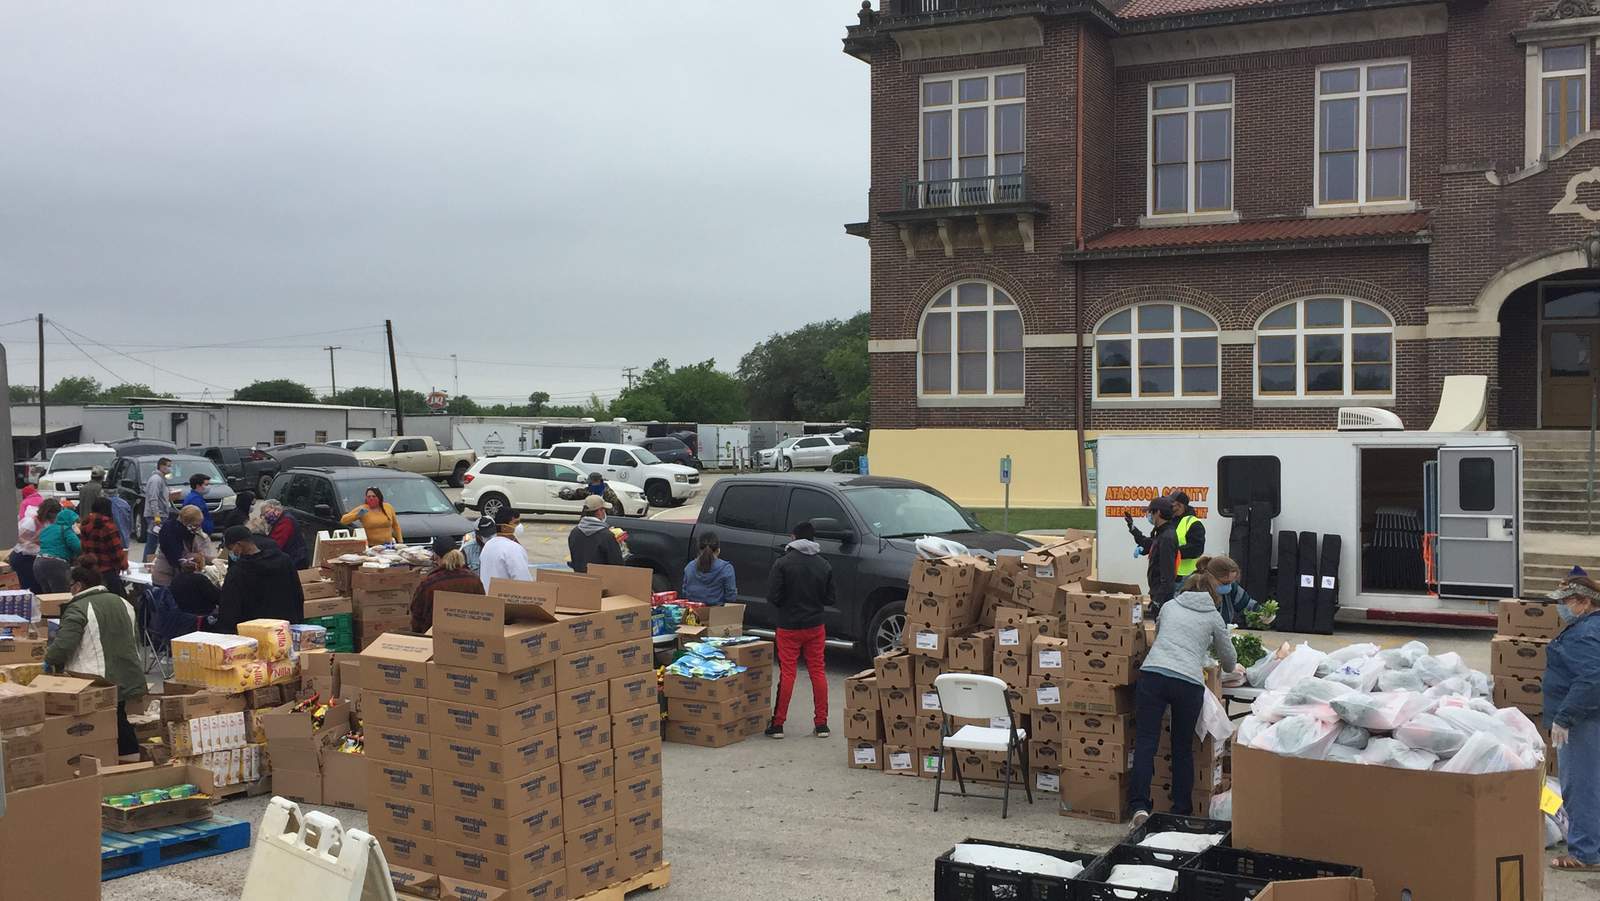 Vehicles line up for more than 2 miles in this Texas community for food distribution